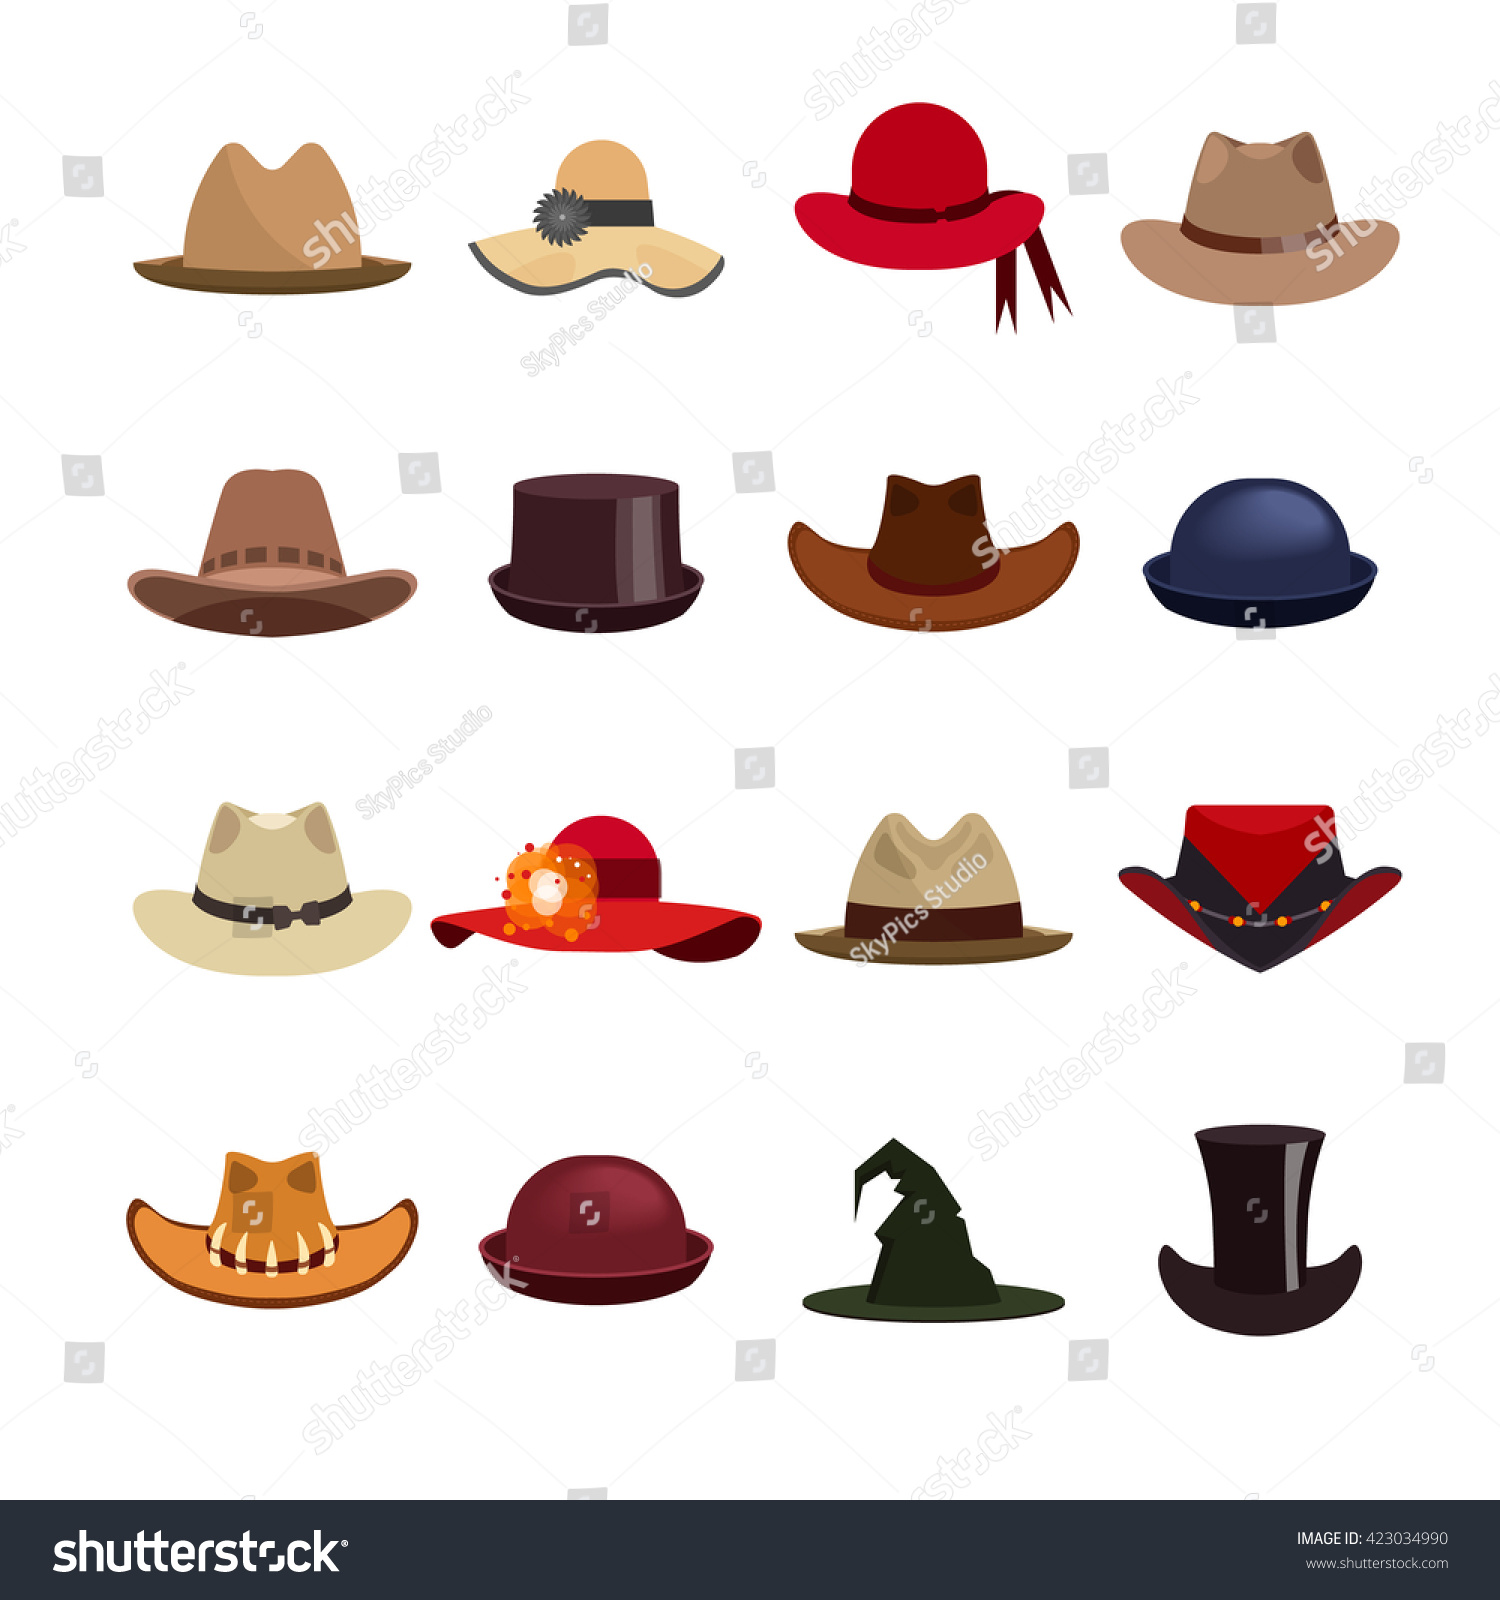 How many different types of hats are there?